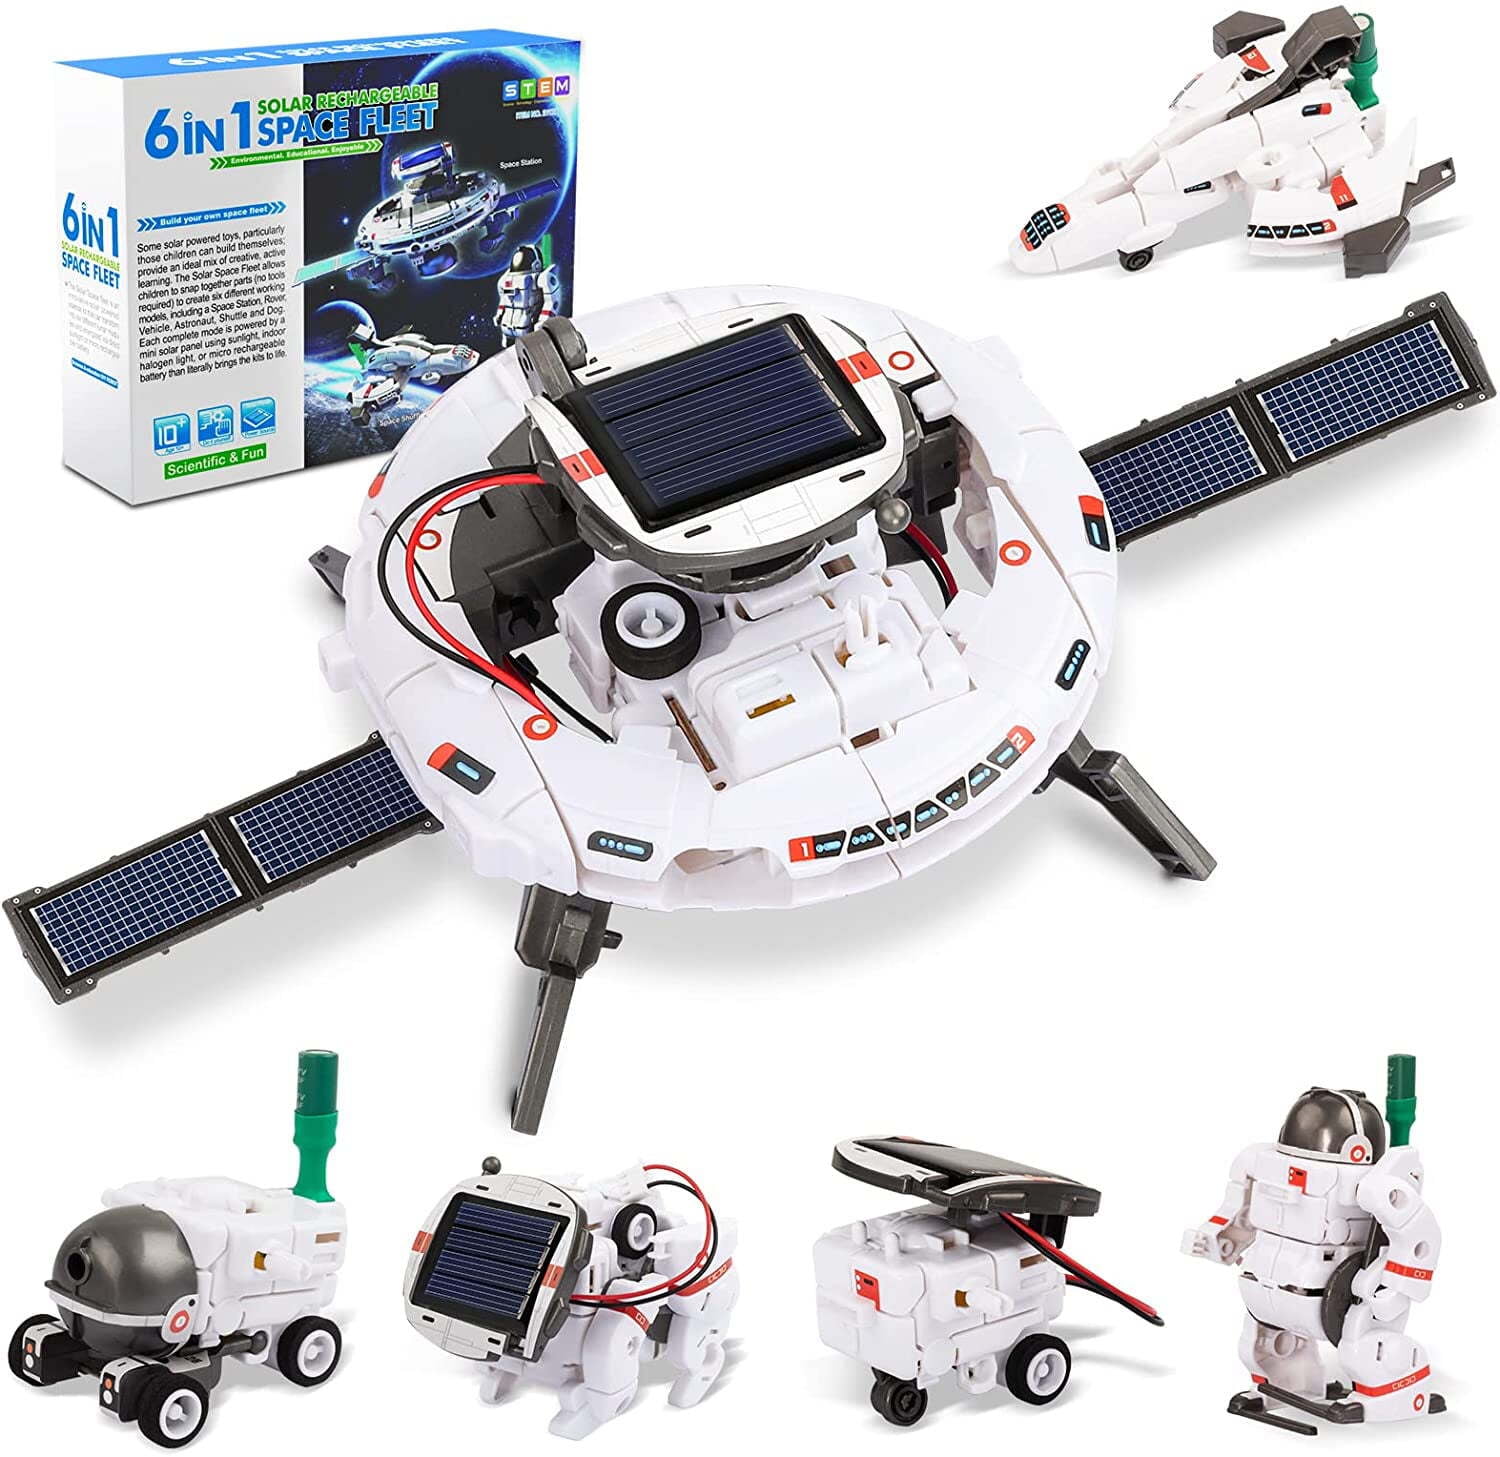 Hot Bee STEM Space Toy Solar Robot Kit for Educational Learning Science Building Robot Toys Gift for Kids Age 8 and Up. - Walmart.com